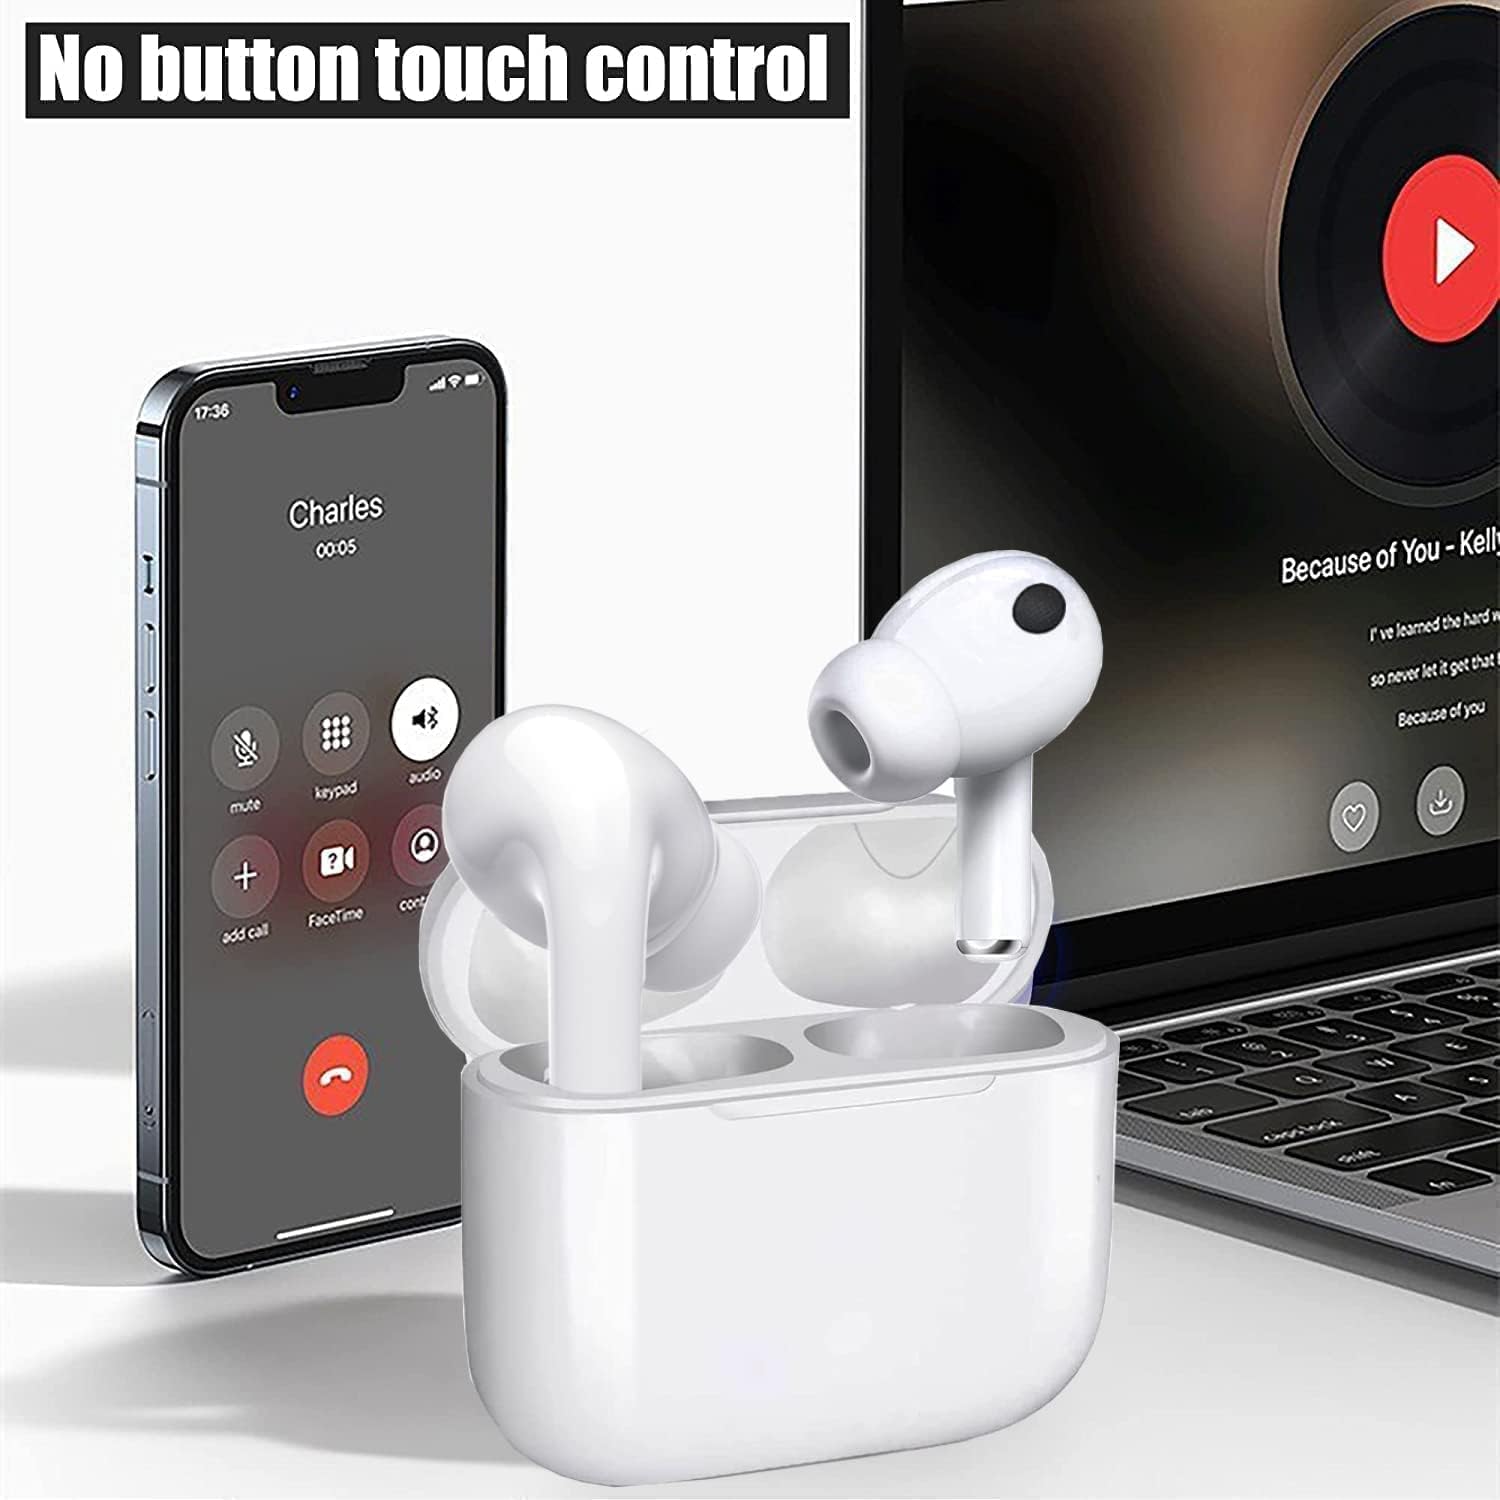 Wireless Earbuds Bluetooth Headphones with Charging Case Noise Cancelling 3D Stereo Headsets Built in Mic in Ear Ear Buds IPX7 Waterproof Earphones for iPhone/Android/airpod pro/Samsung